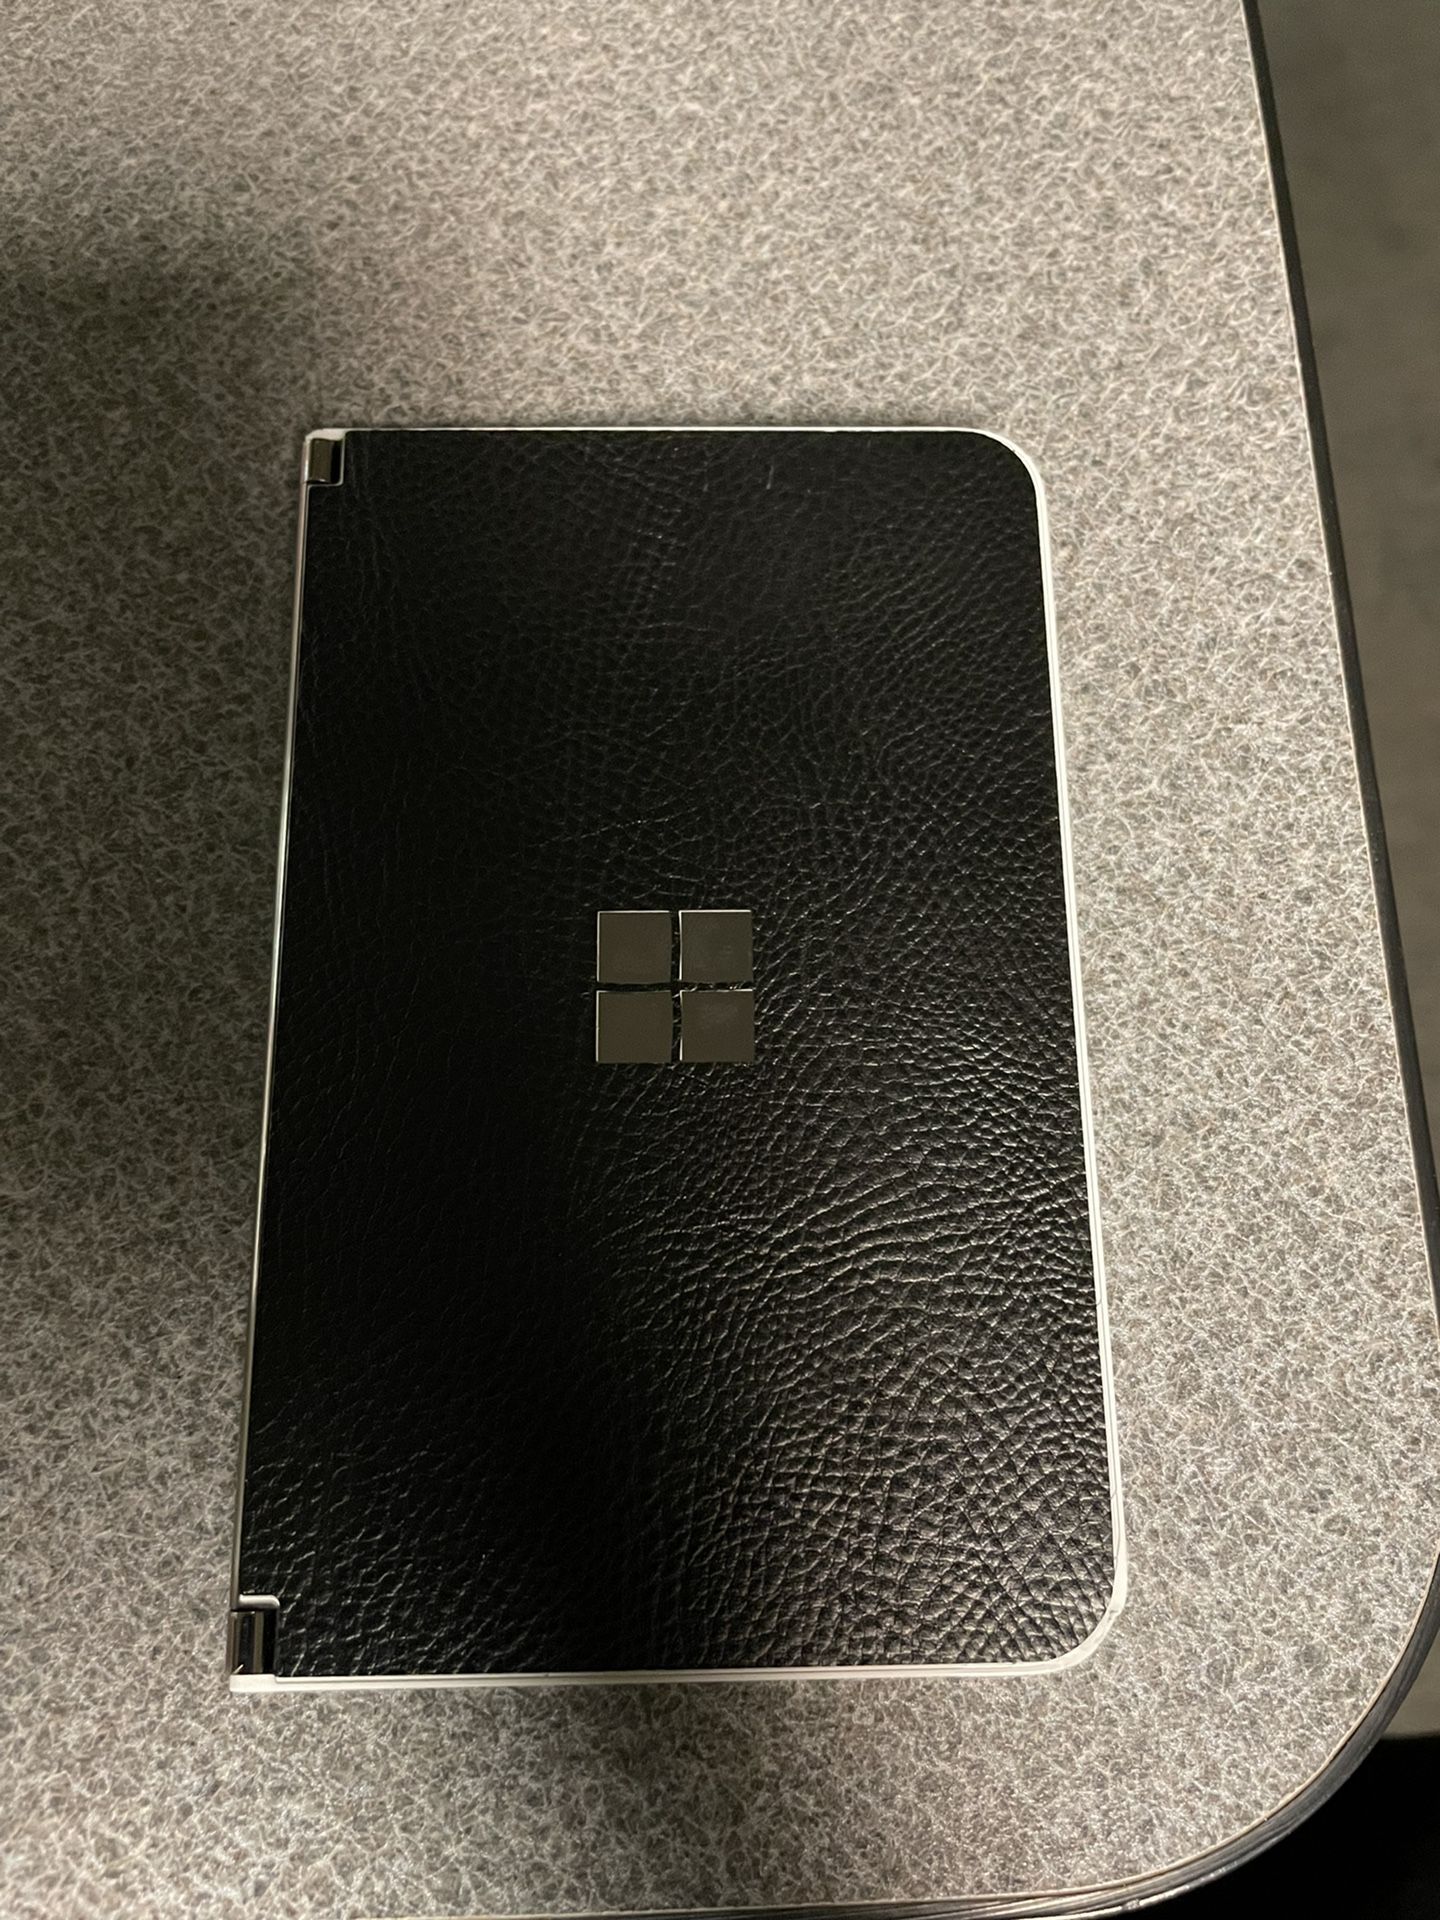 Surface Duo 256gb